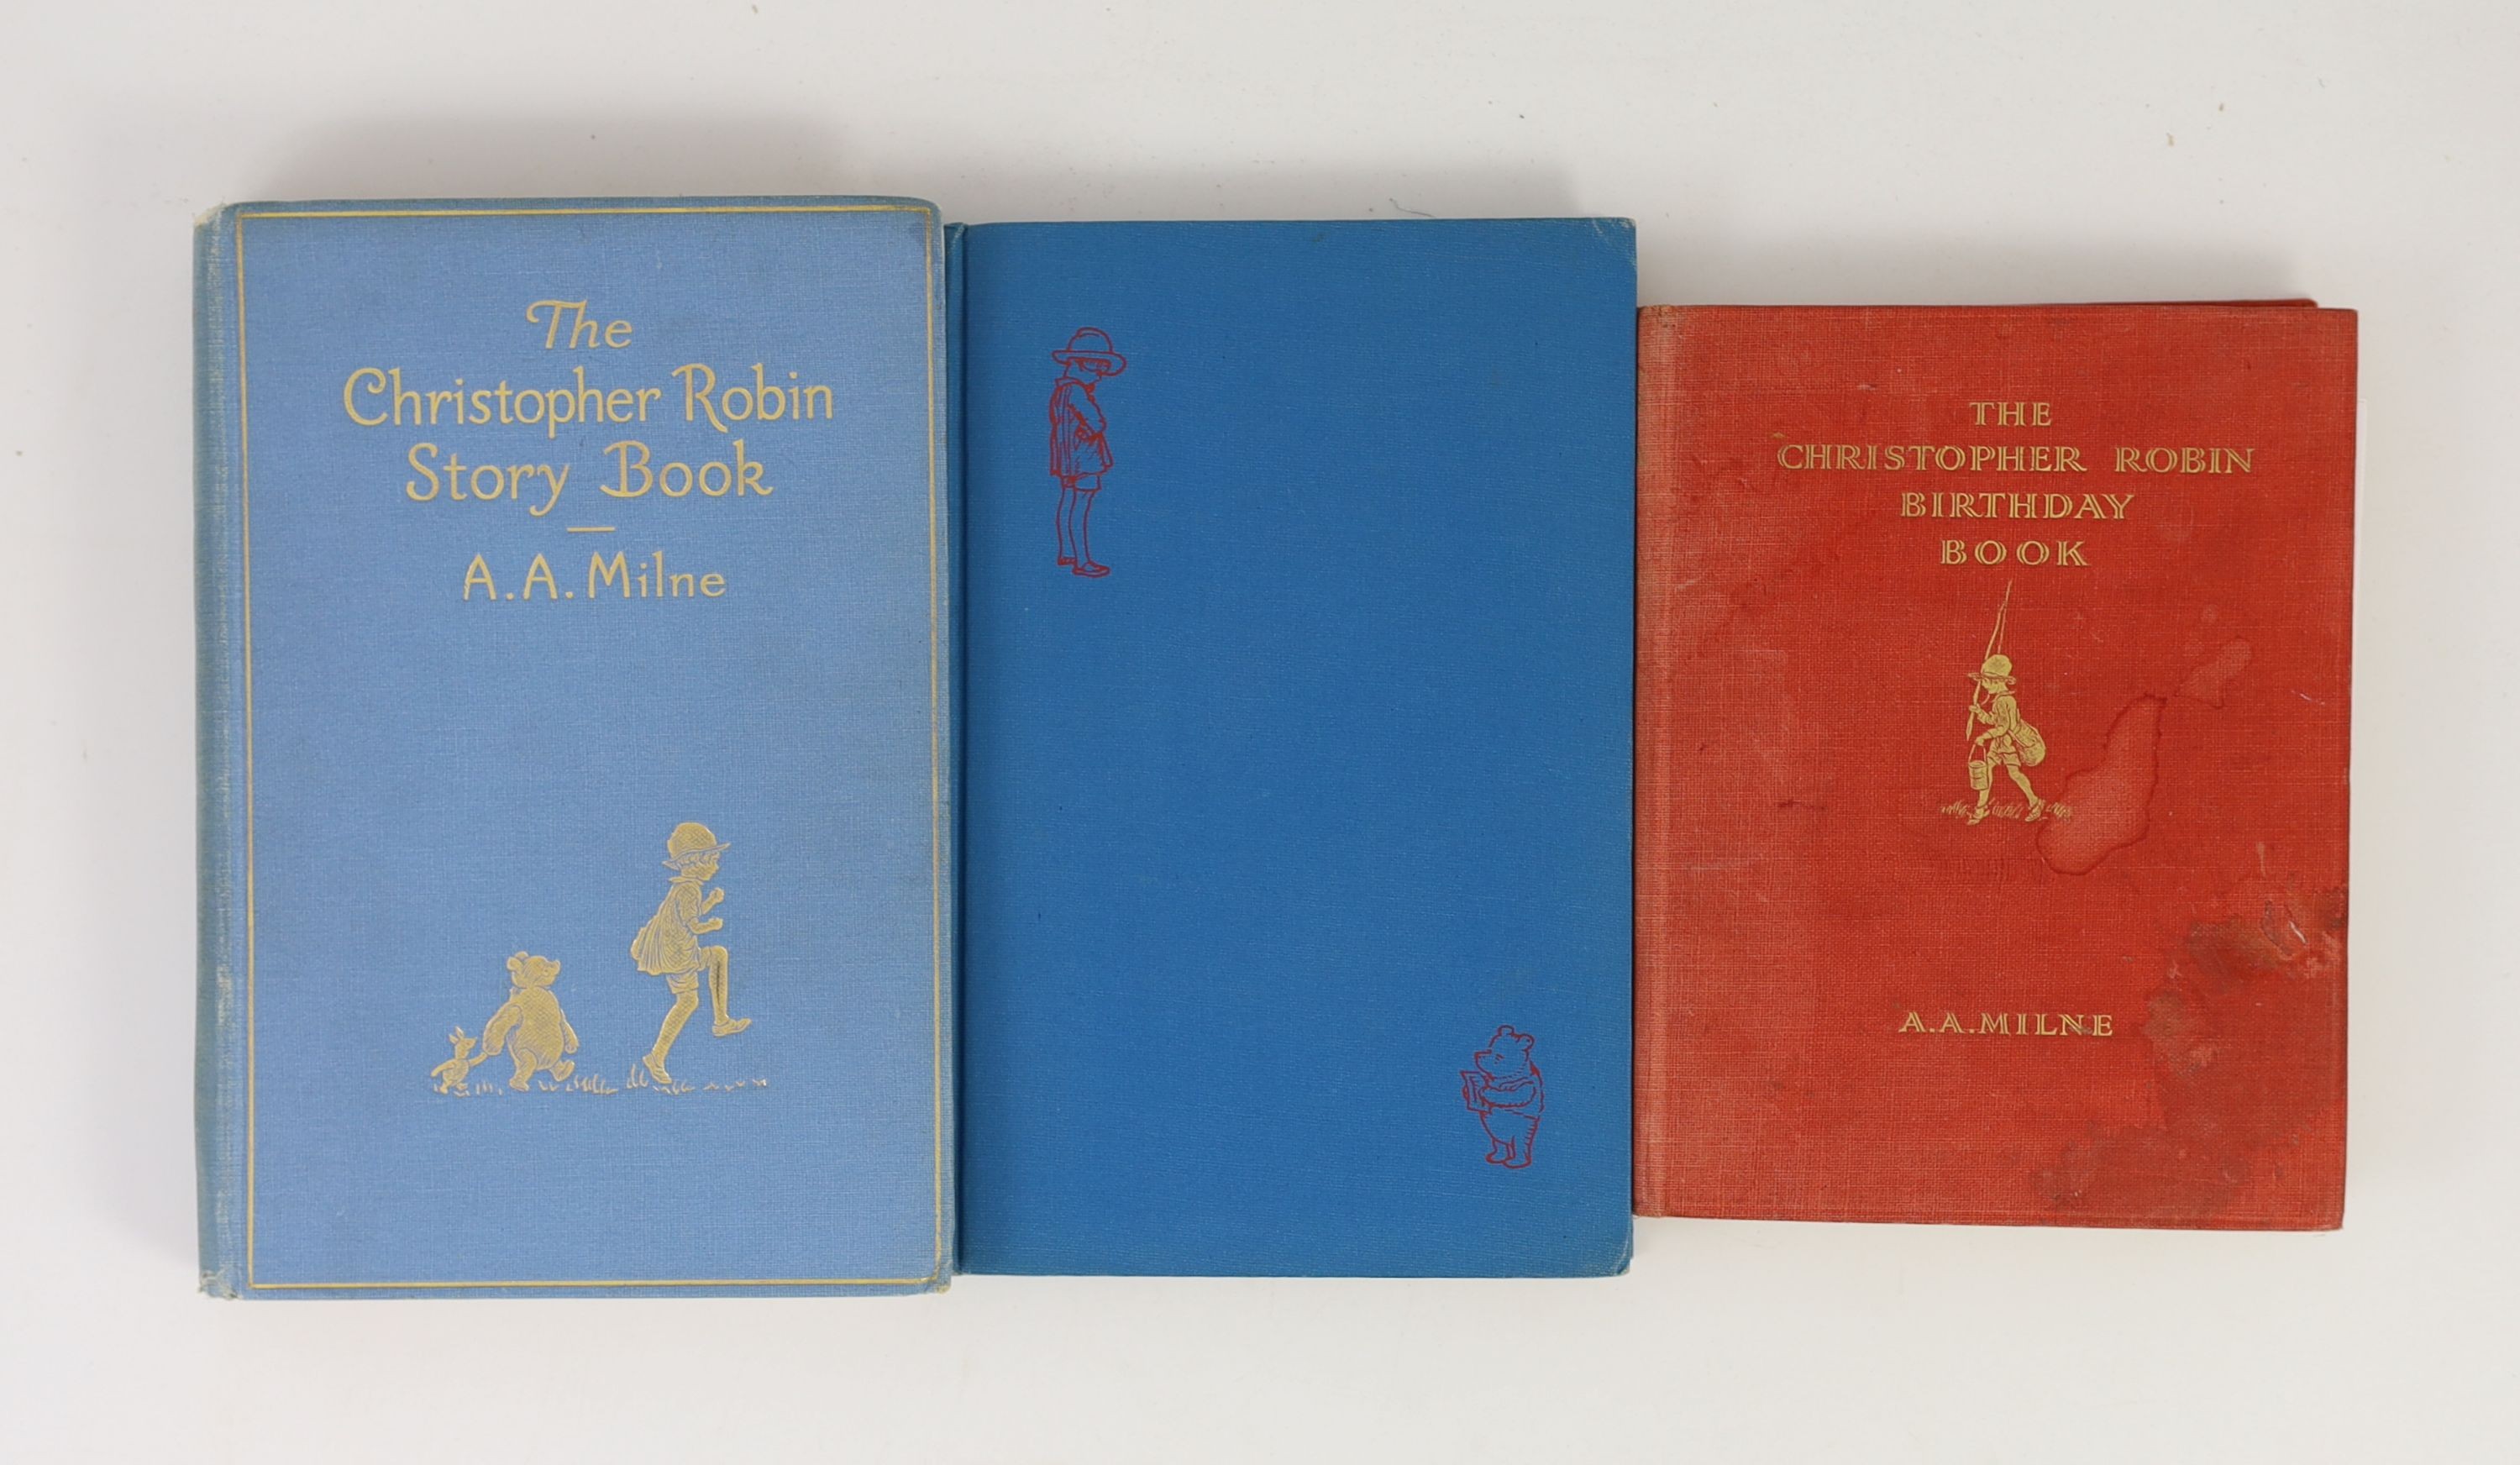 Dr. Marie Stopes interest - Milne. A. A - The Christopher Robin Birthday Book, 1st edition, with two signatures of Dr. Stopes, for the dates 13th October and 15th October [her birthday], formerly in the ownership of her